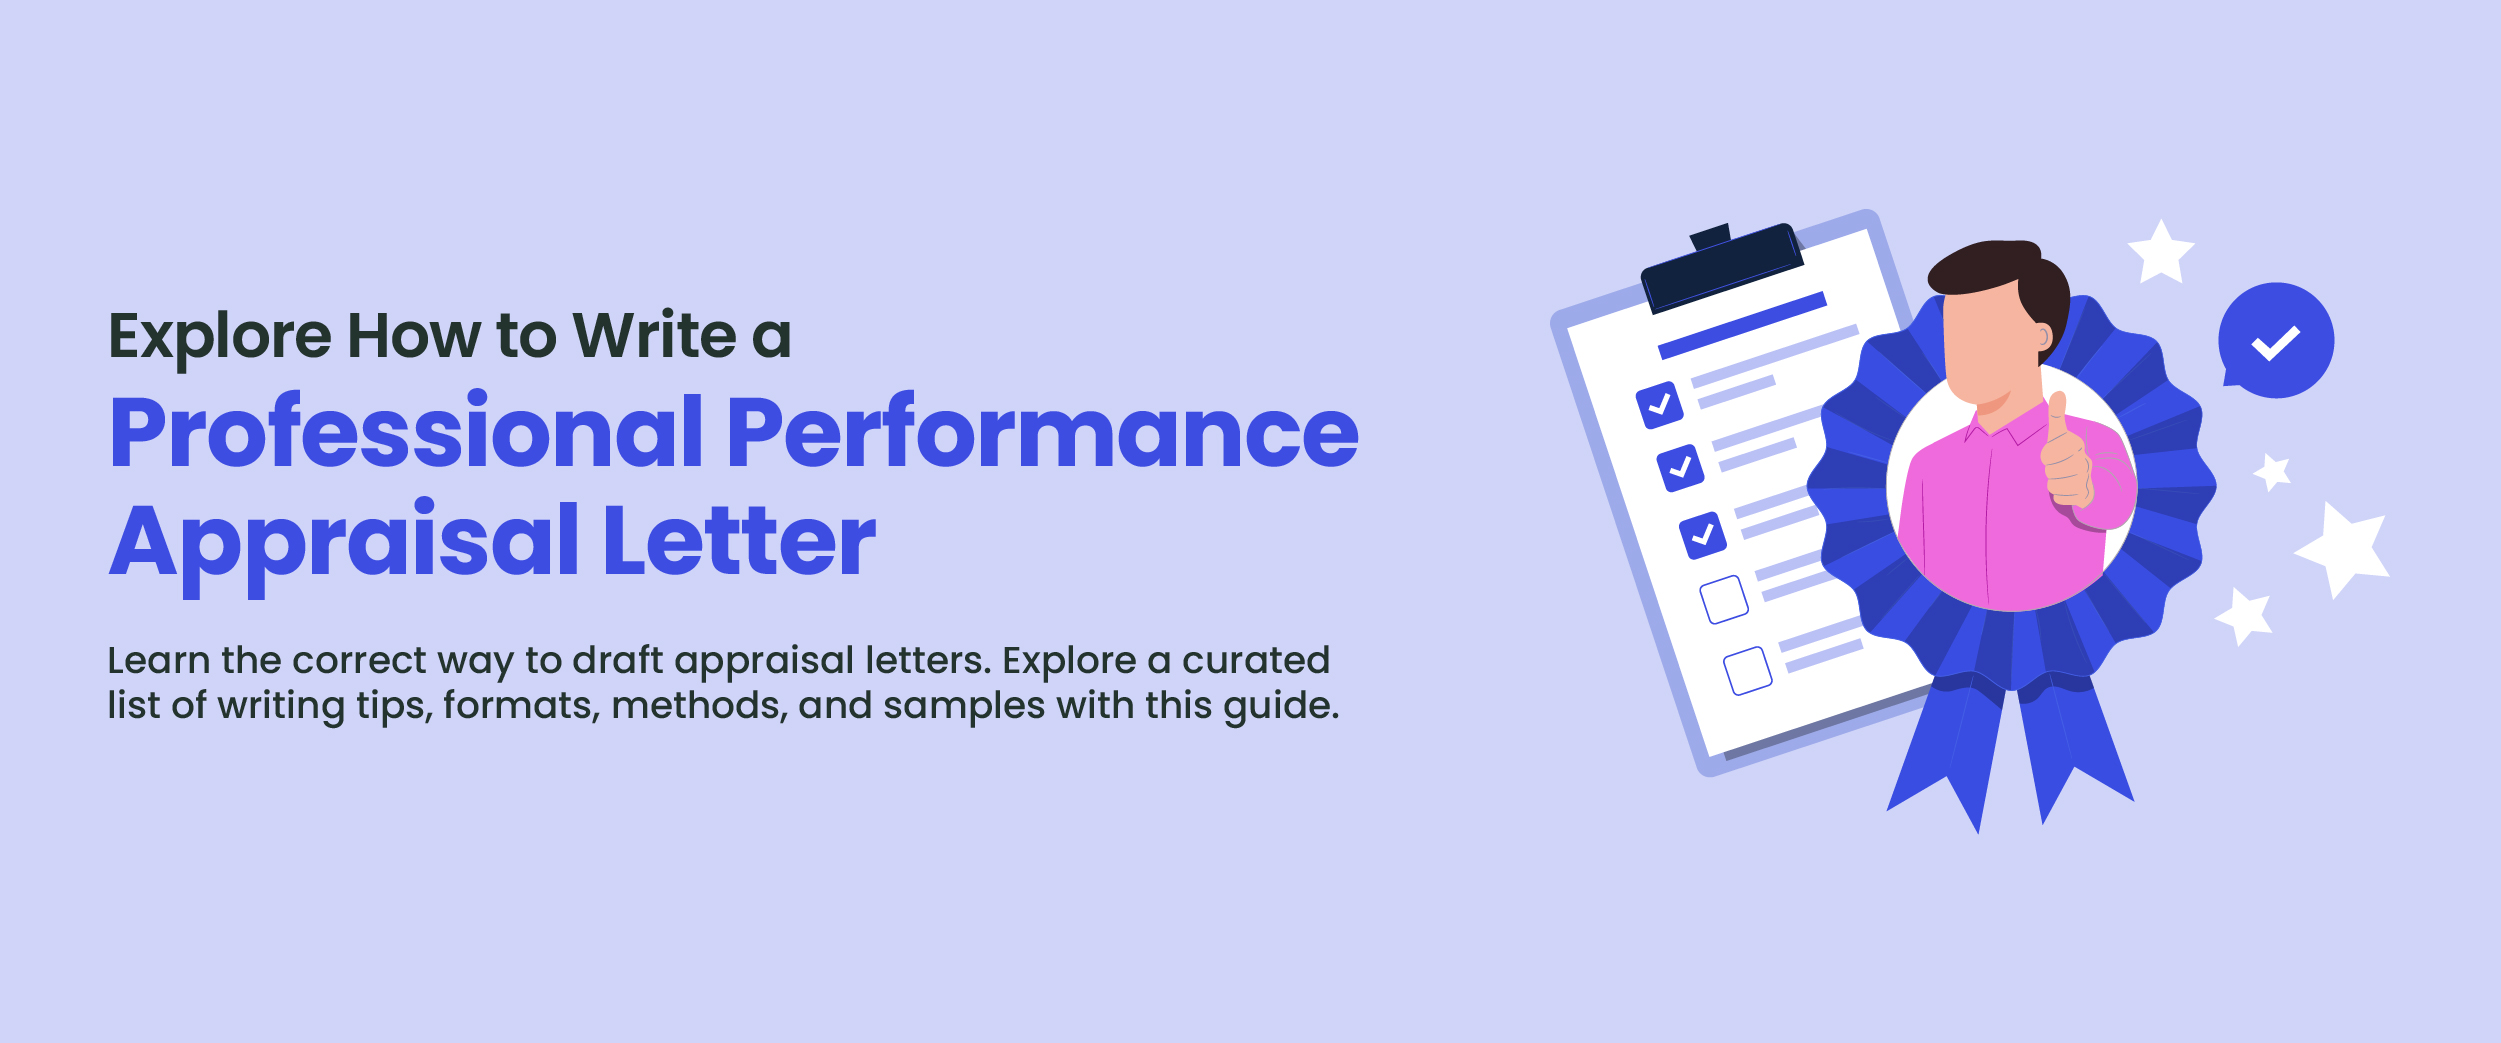 Explore How to Write a Professional Performance Appraisal Letter